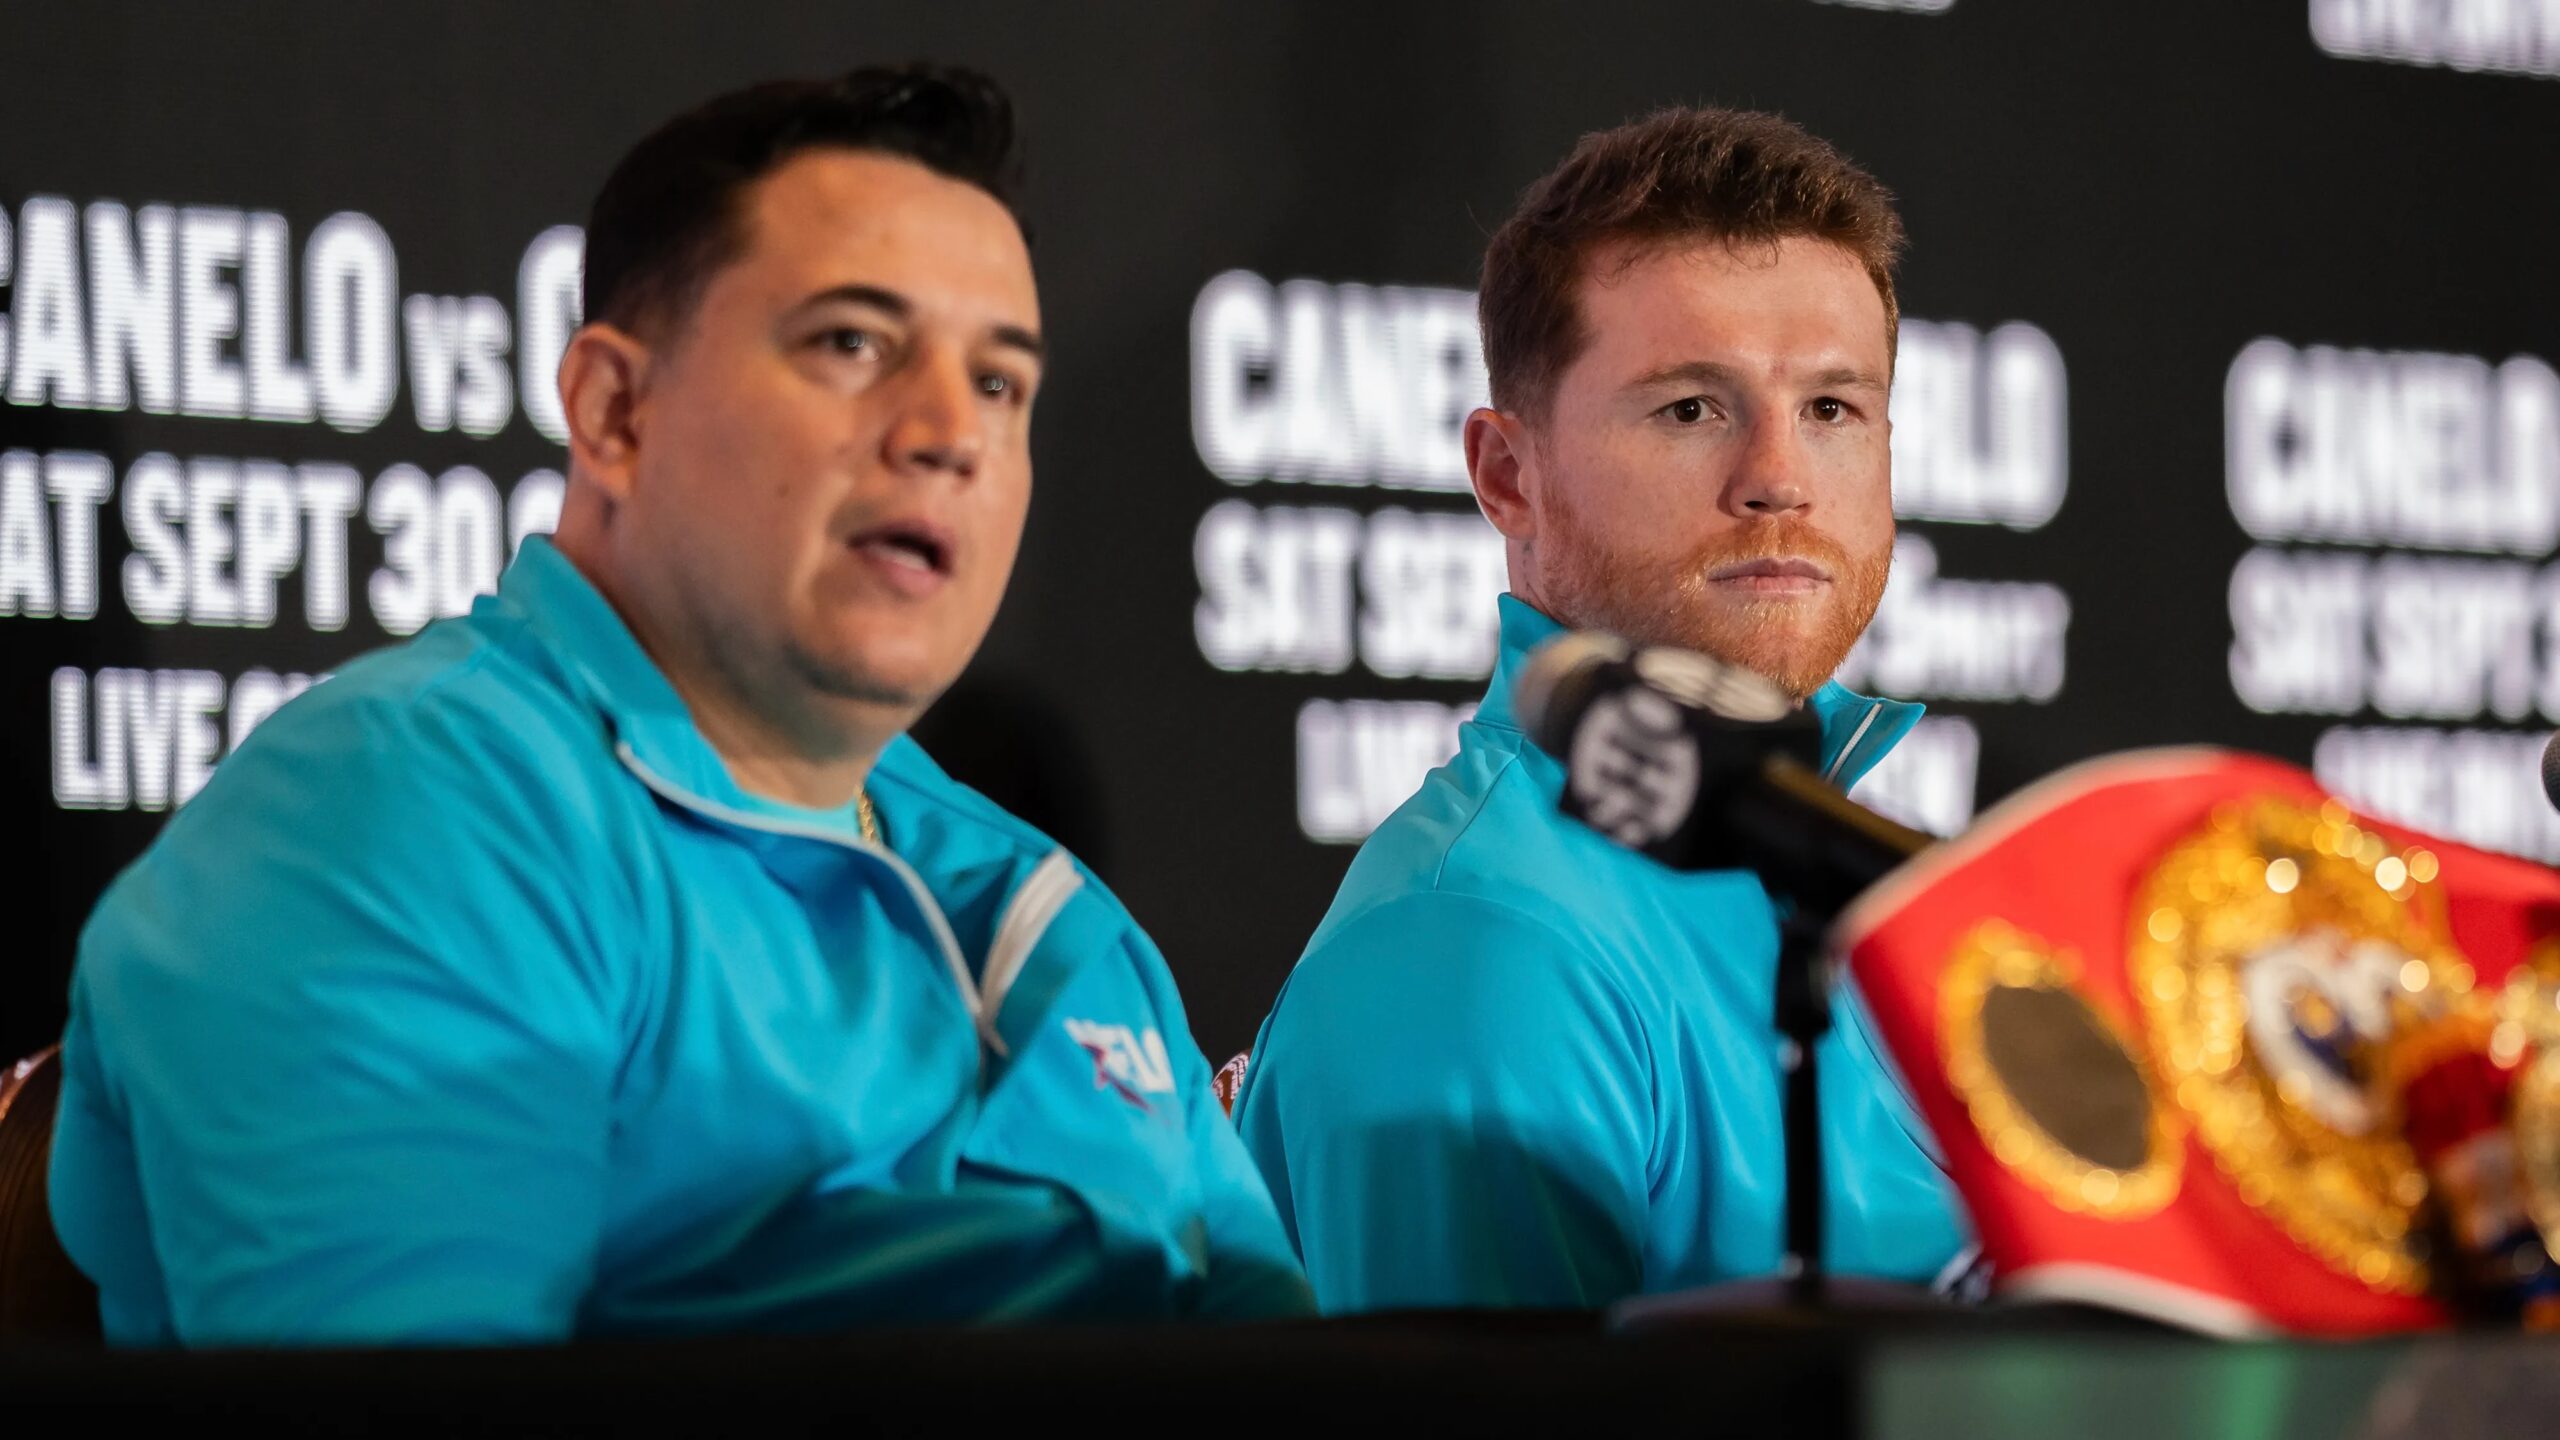 Eddy Reynoso says Canelo Alvarez respects Jermell Charlo but will "certainly try to go for the knockout"